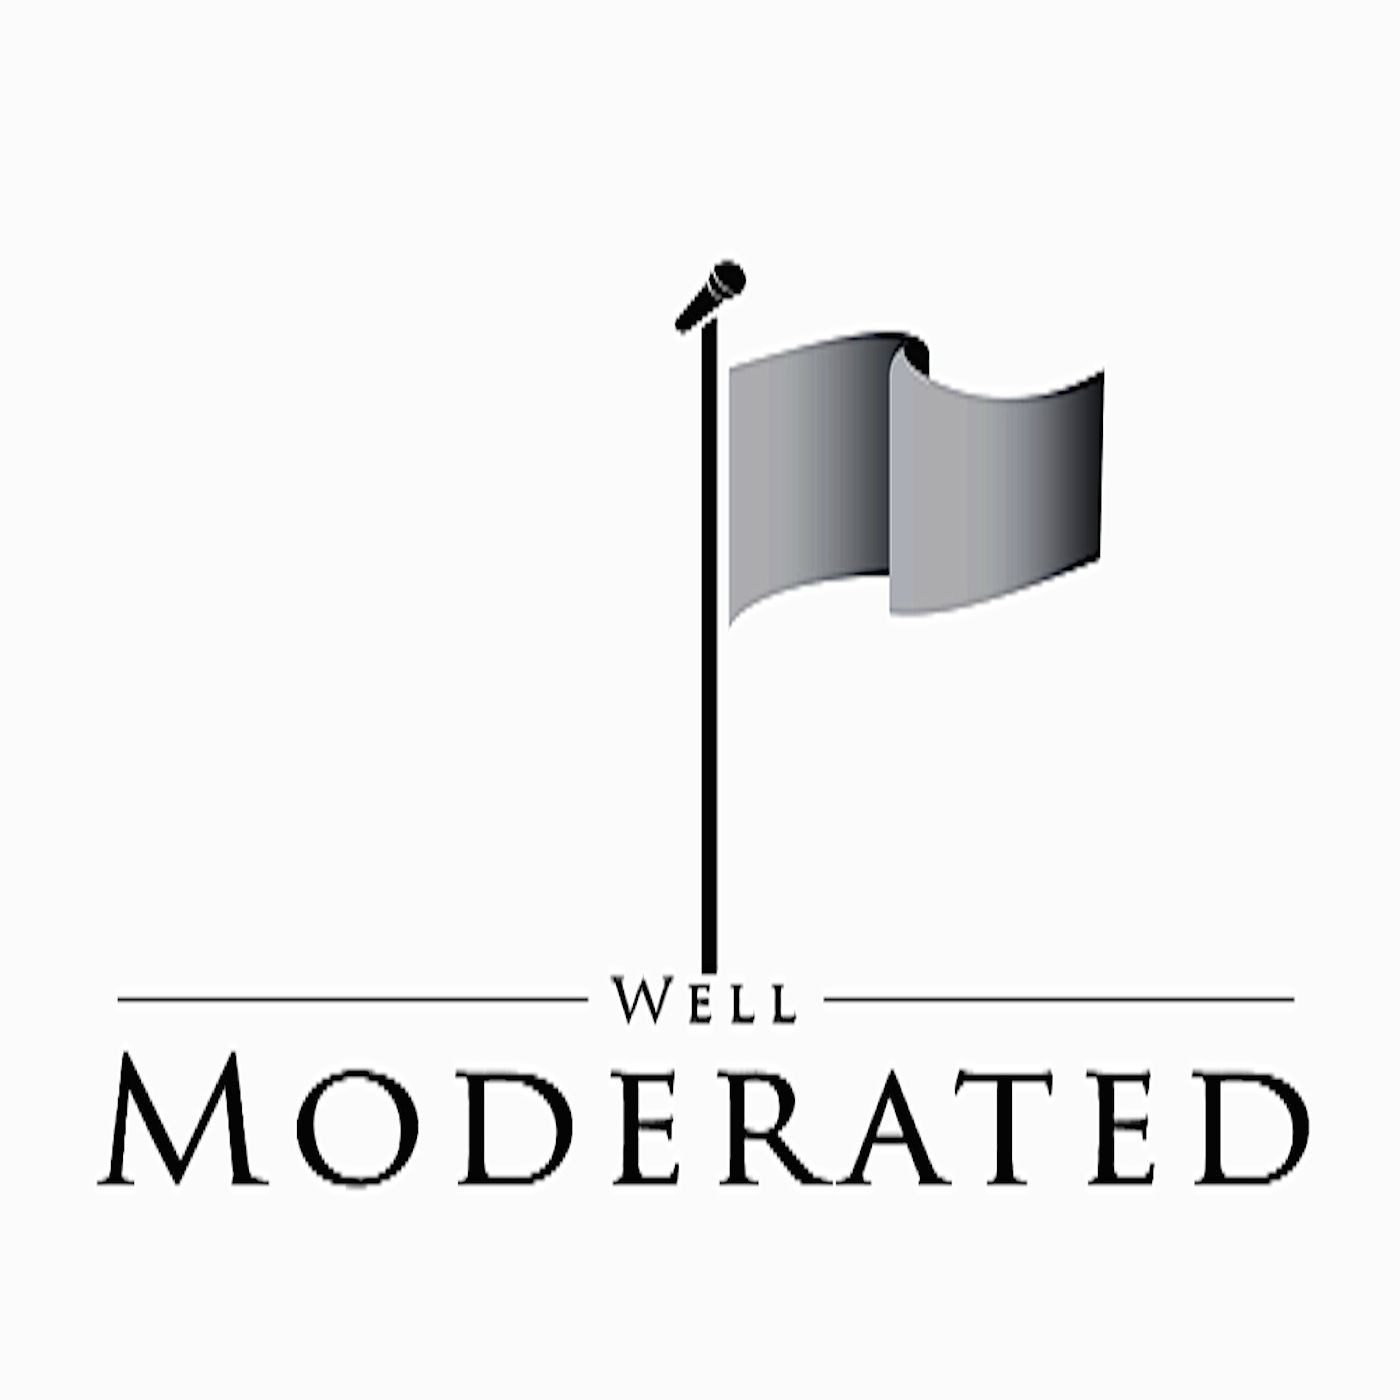 The well moderated podcast